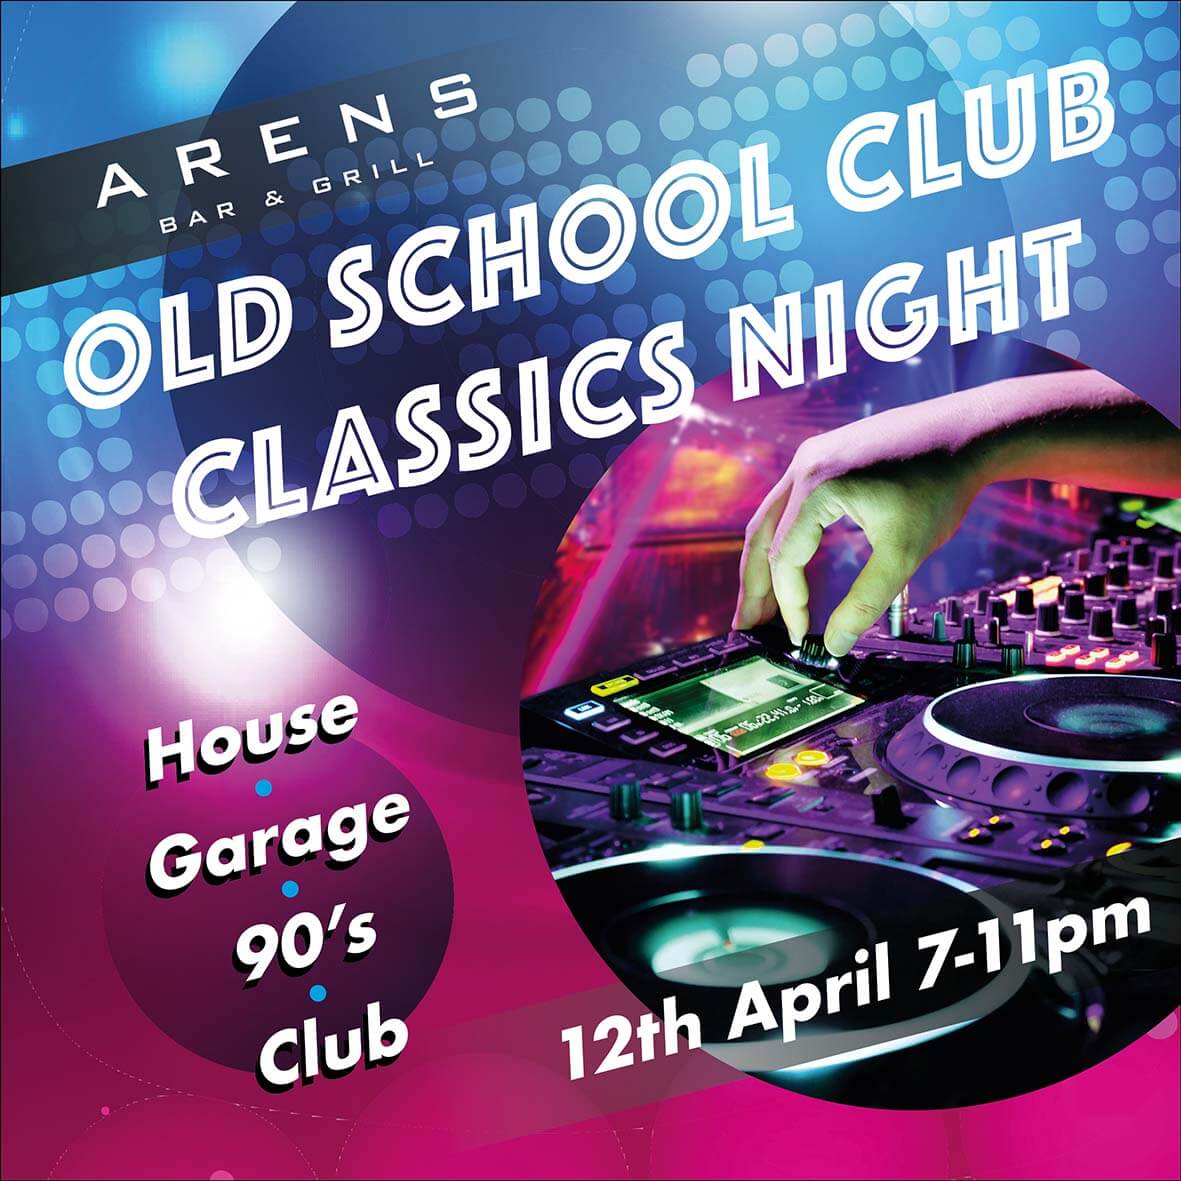 Club Night at Arens